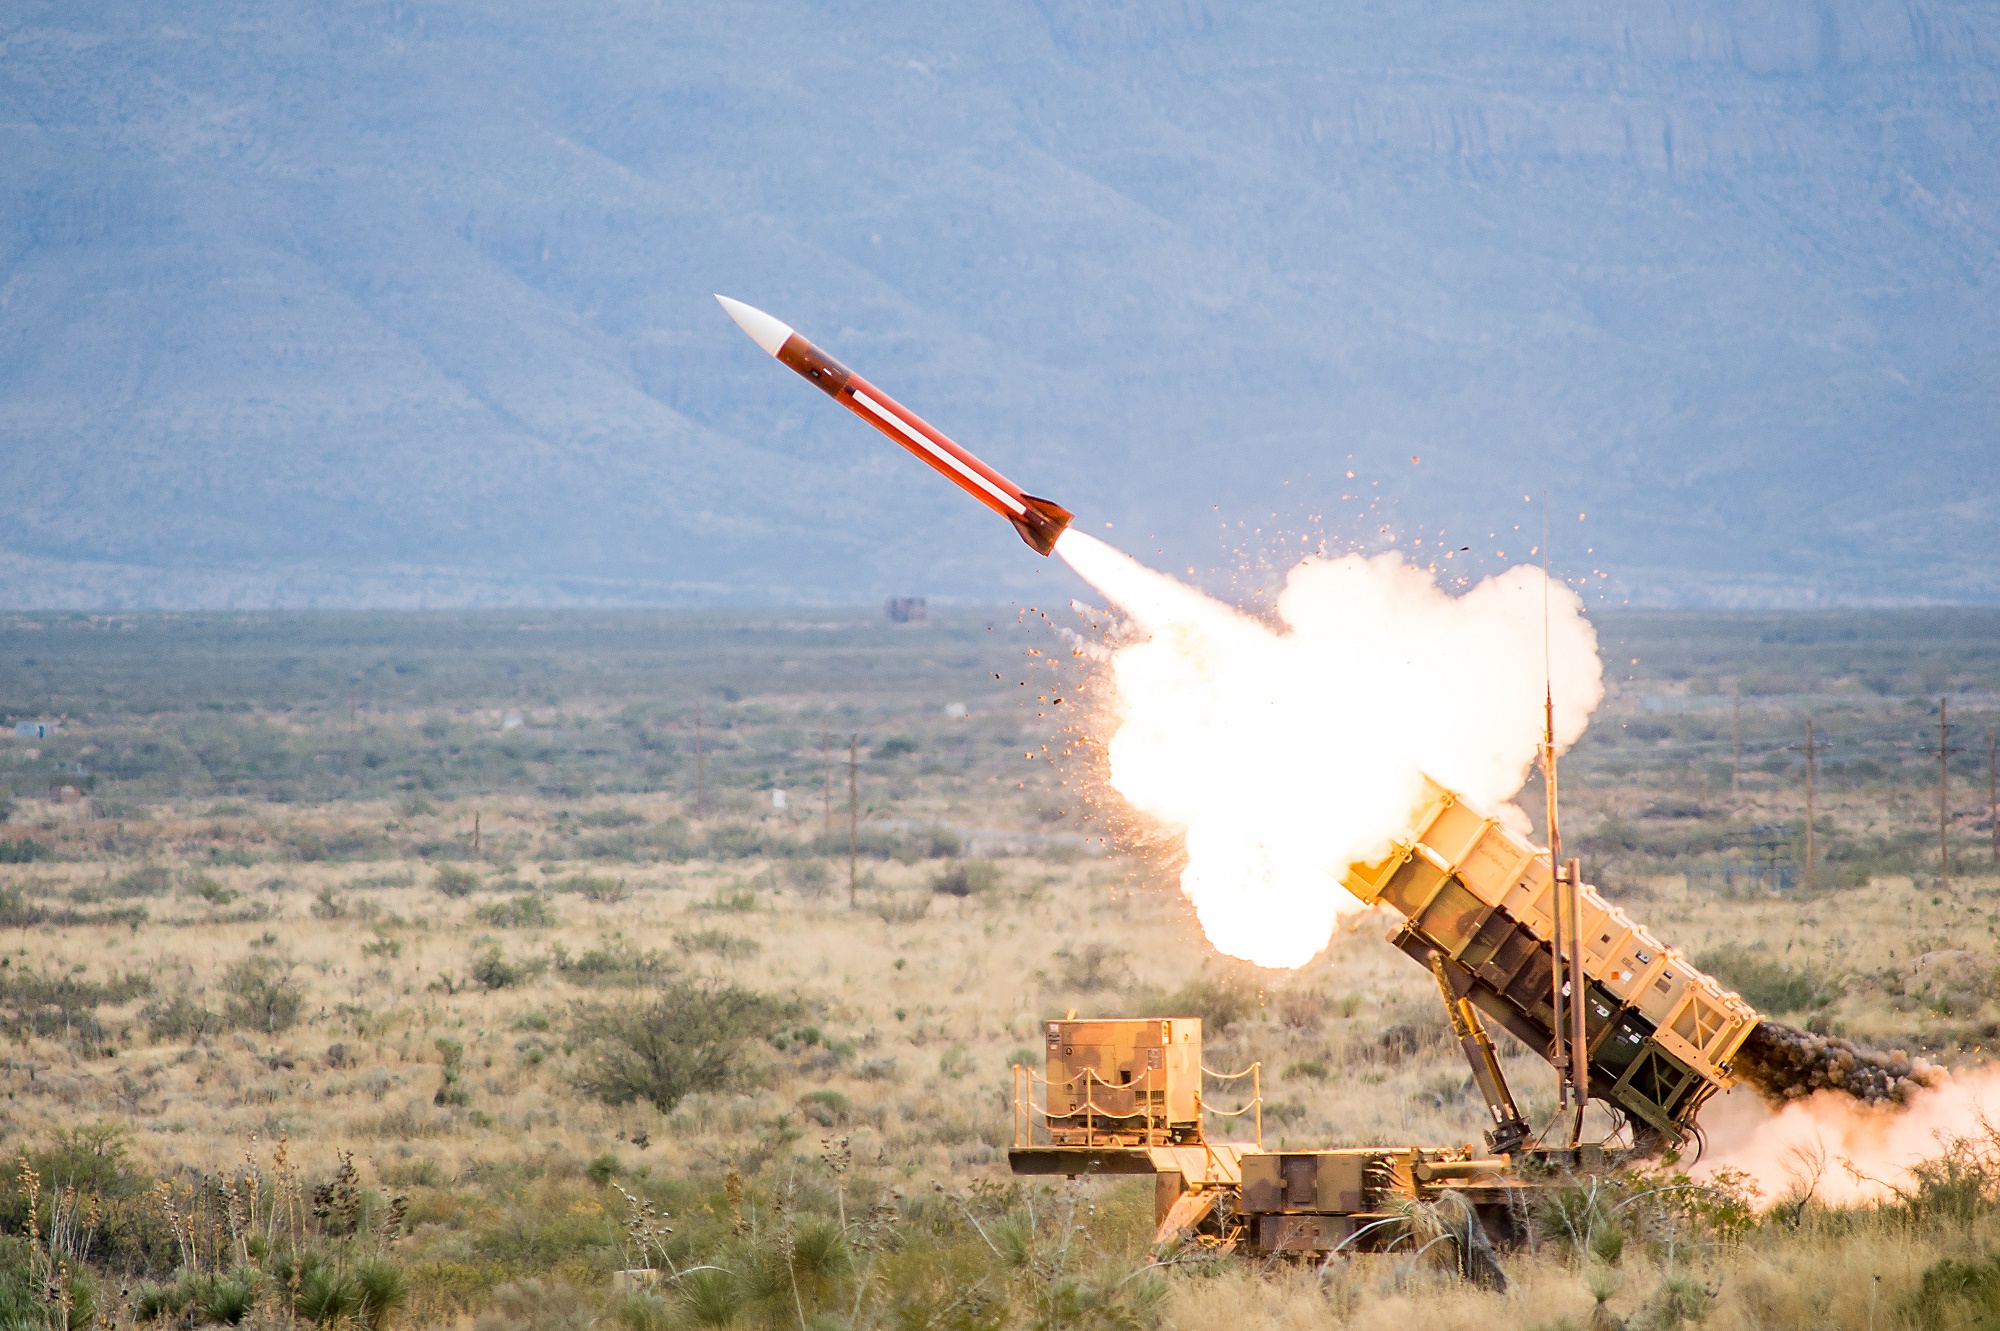 Patriot missile-defense battery is a long-range, high altitude, all-weather solution that has been rigorously tested more than 2,500 times with U.S. Army oversight under real-world conditions.